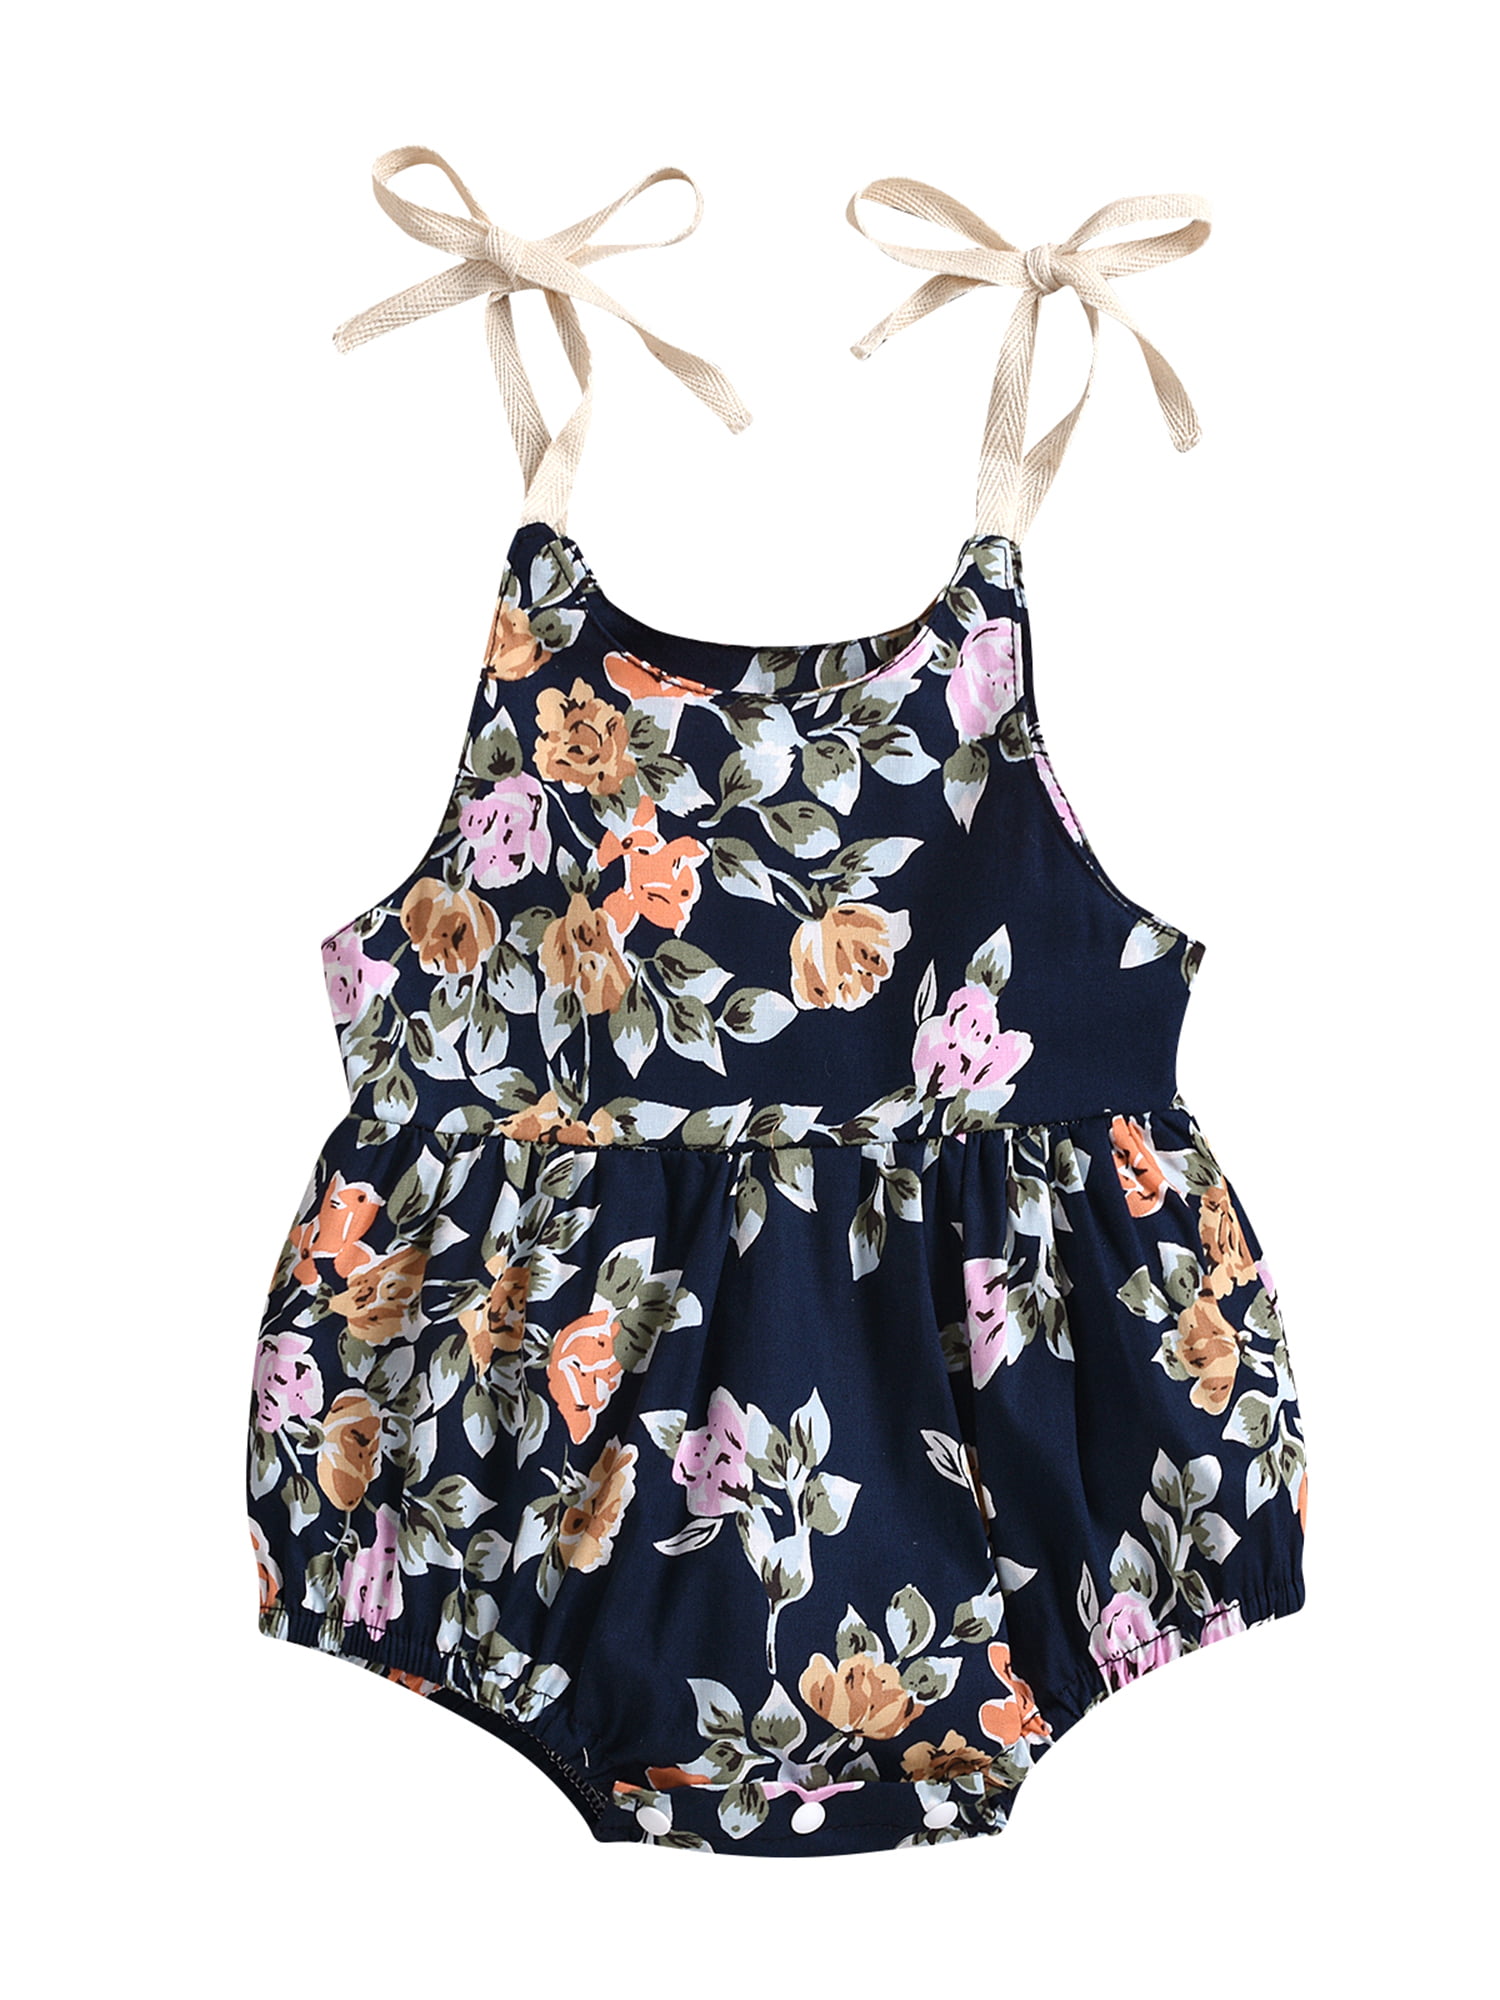 Newborn Baby Girl Strap Romper Bodysuit Sunsuit Floral Summer Clothes Outfits